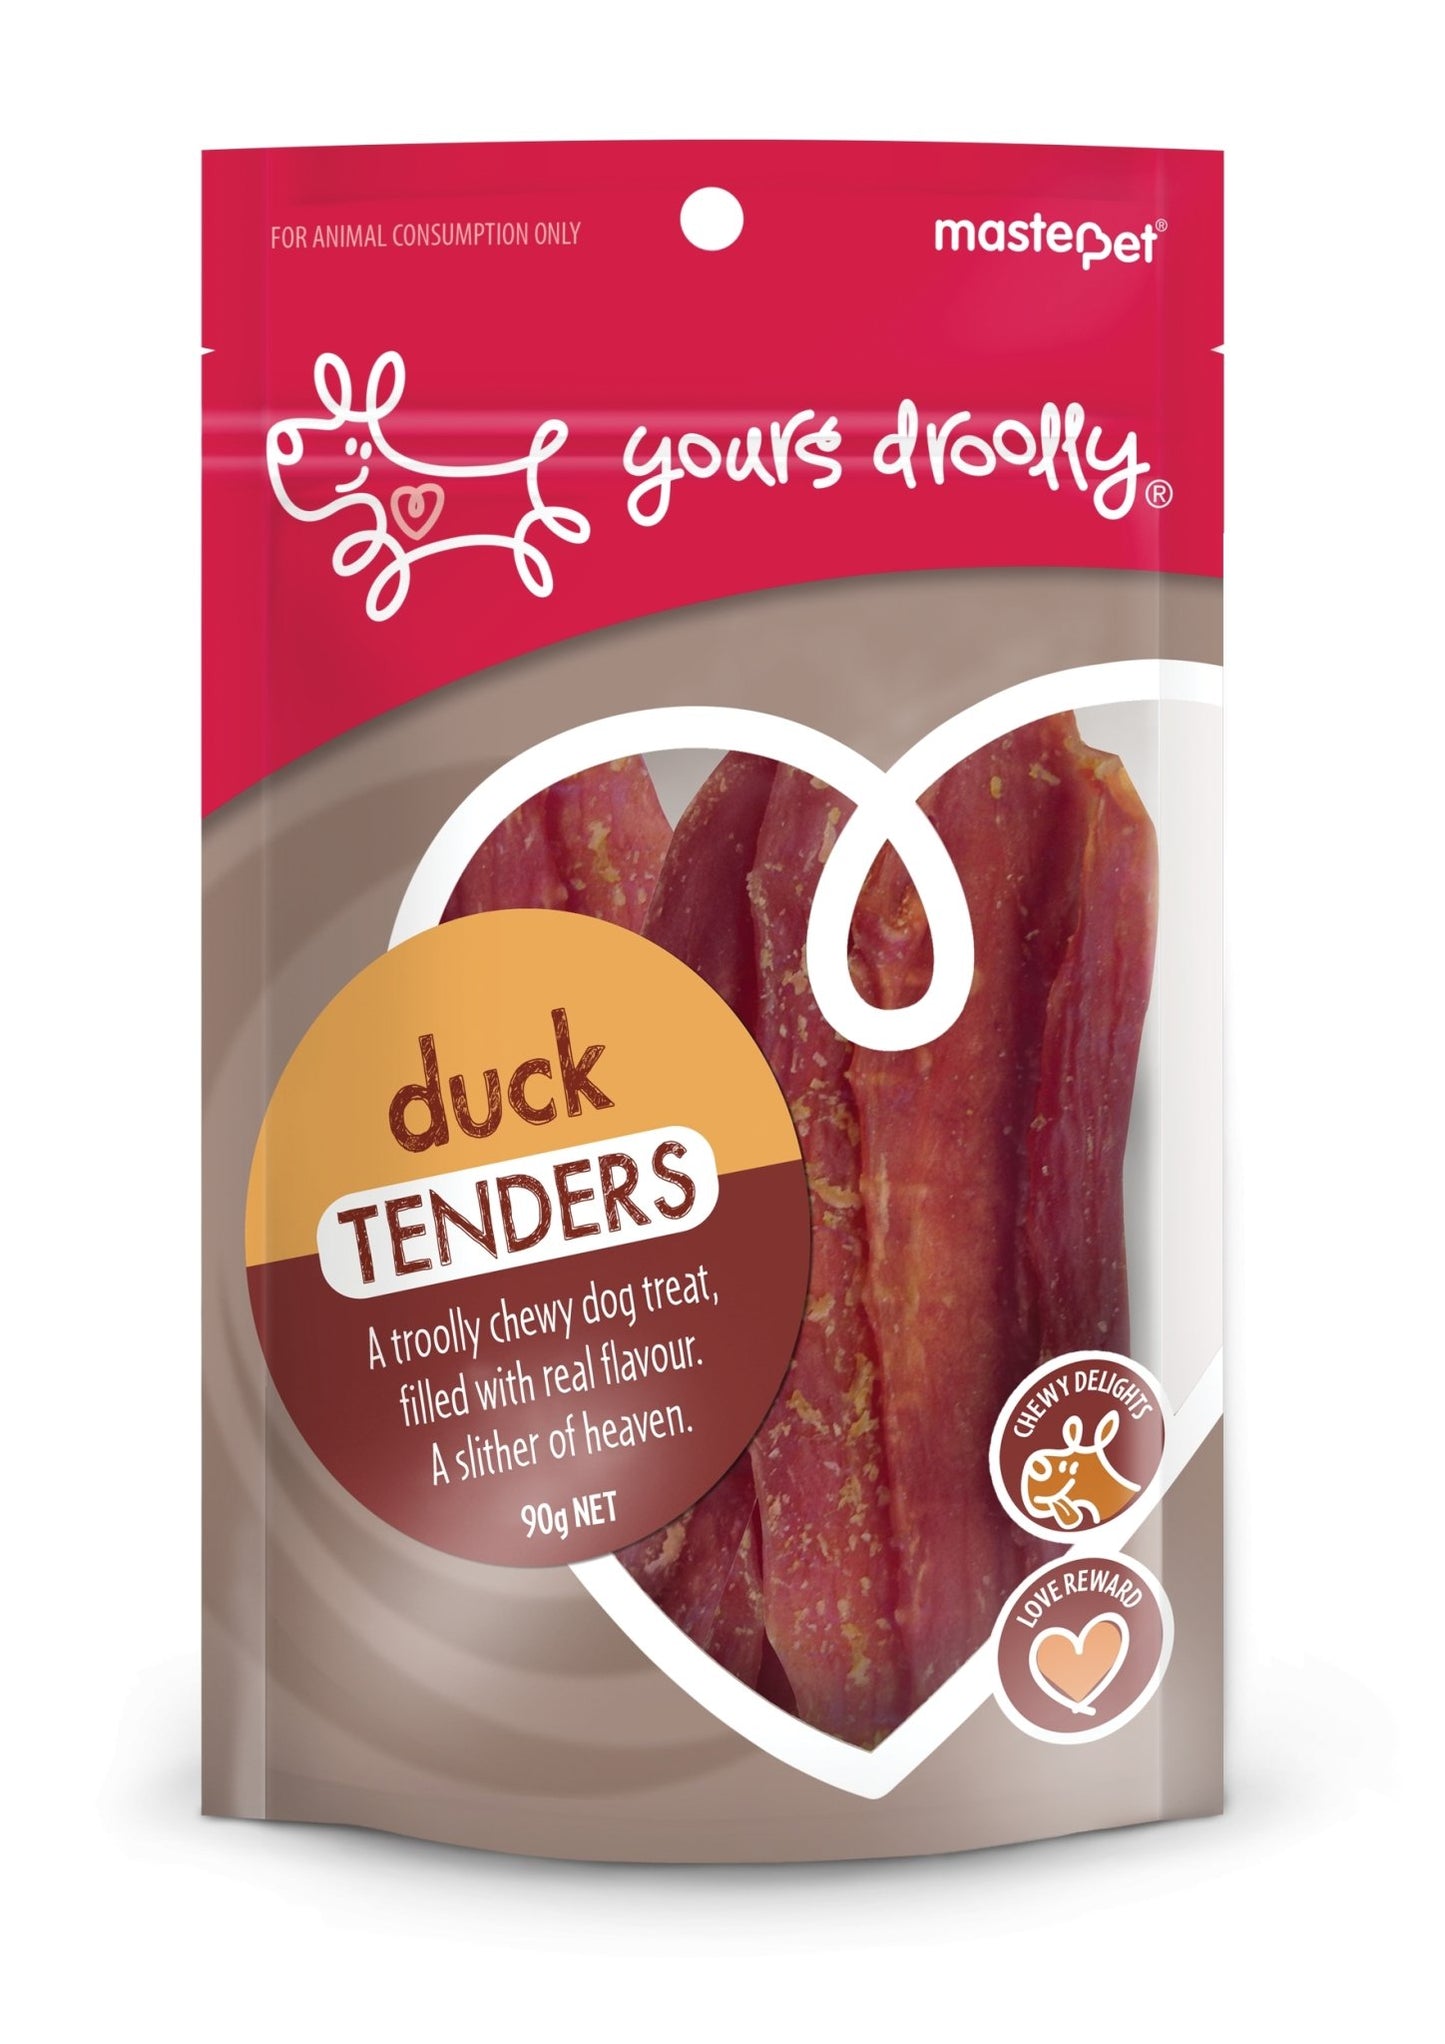 Yours Droolly Duck Tenders 450g - Woonona Petfood & Produce